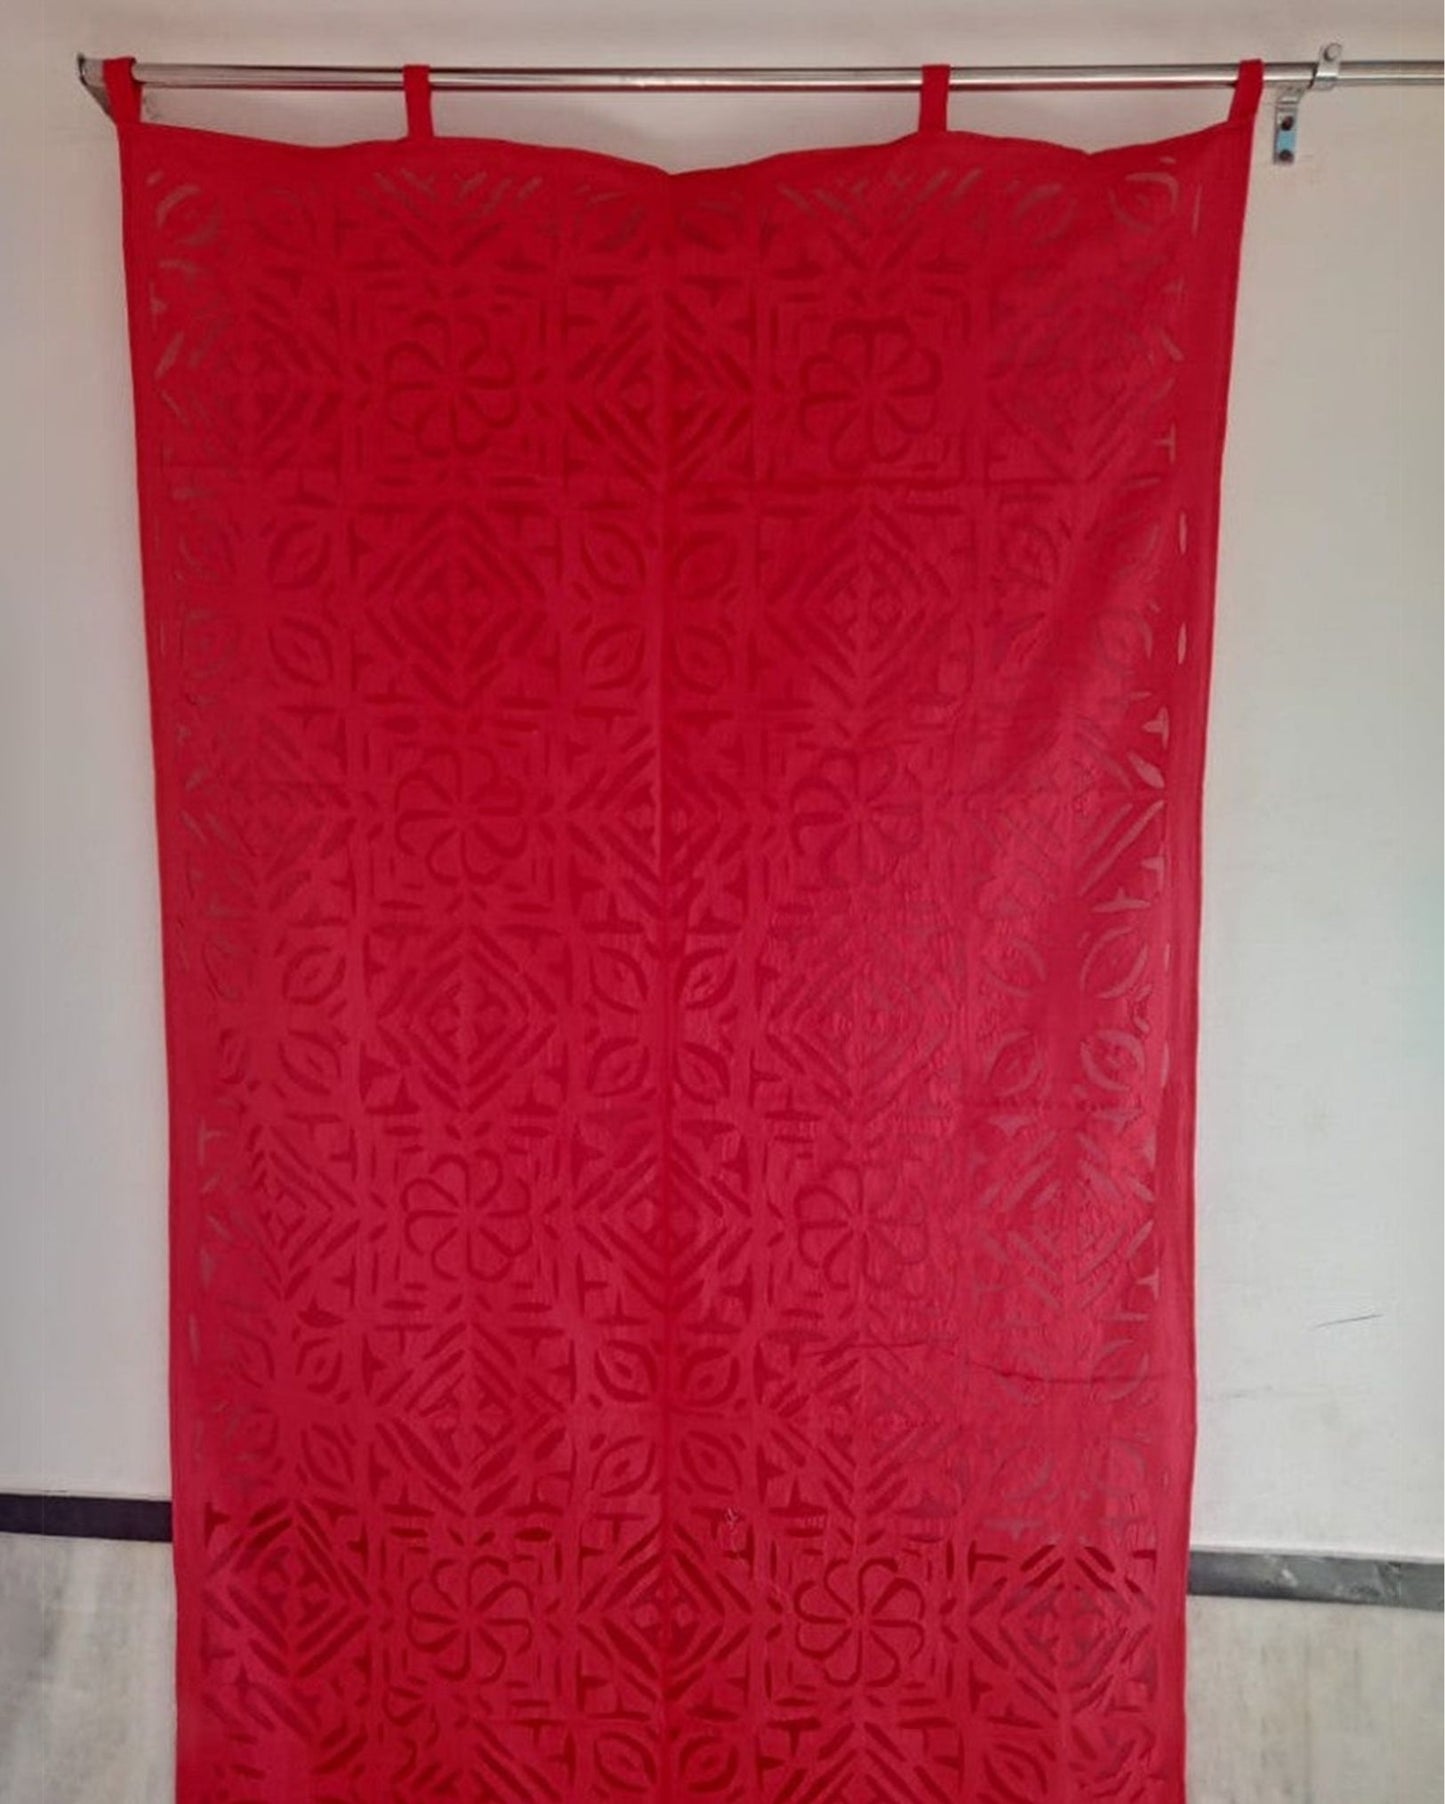 Timeless Handcrafted Red Applique Curtain